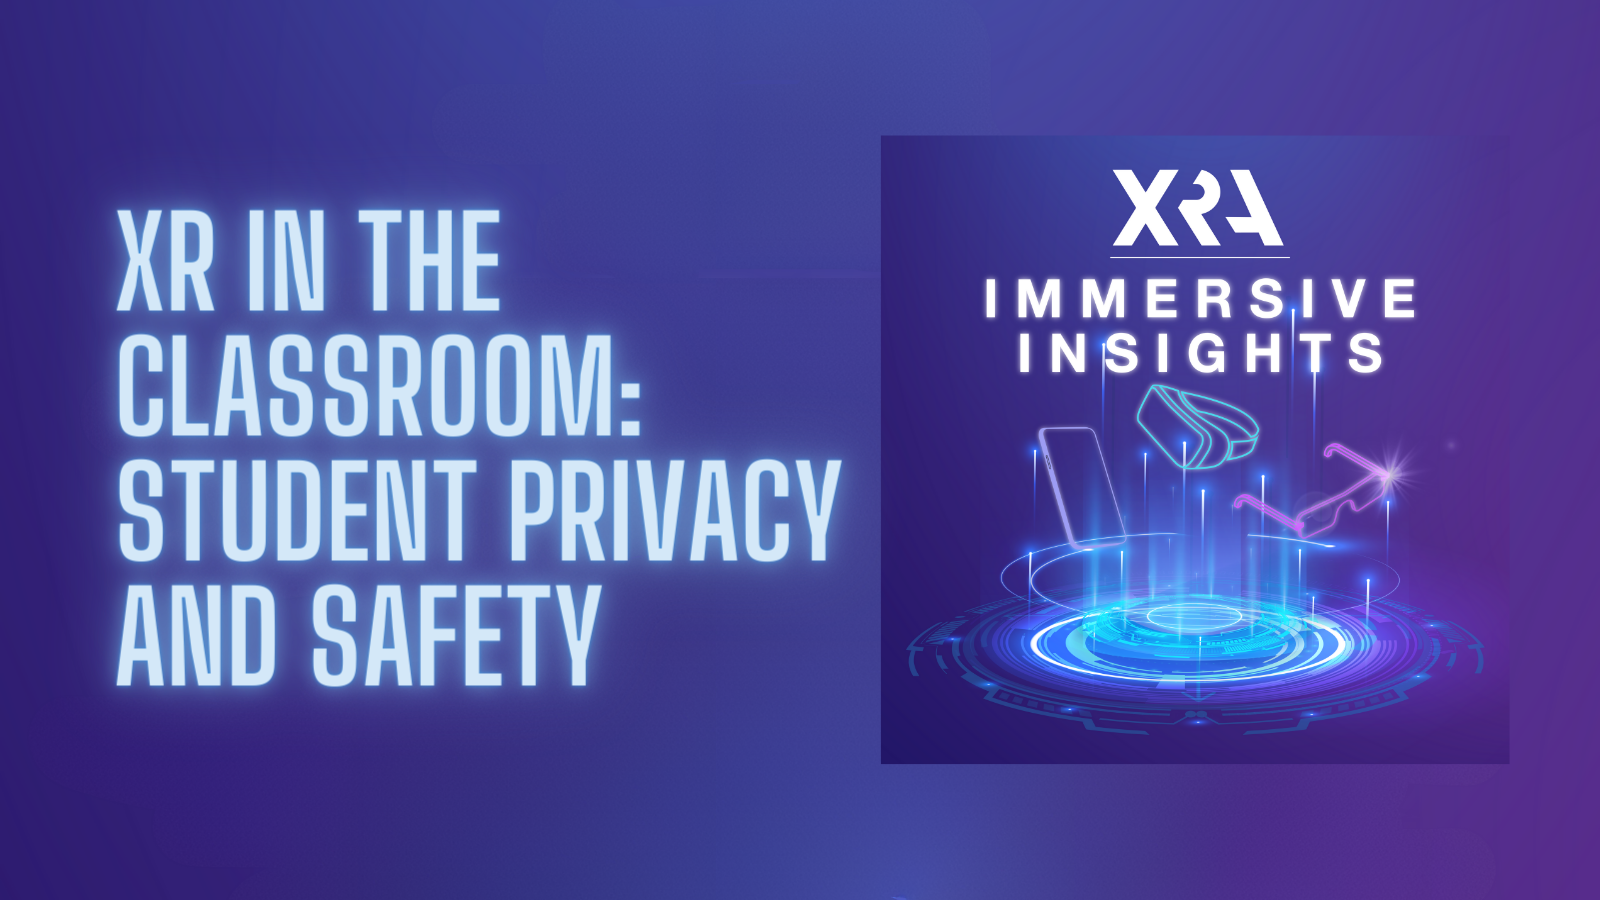 CHECK OUT THE LATEST EPISODE OF “IMMERSIVE INSIGHTS: XR IN THE CLASSROOM”